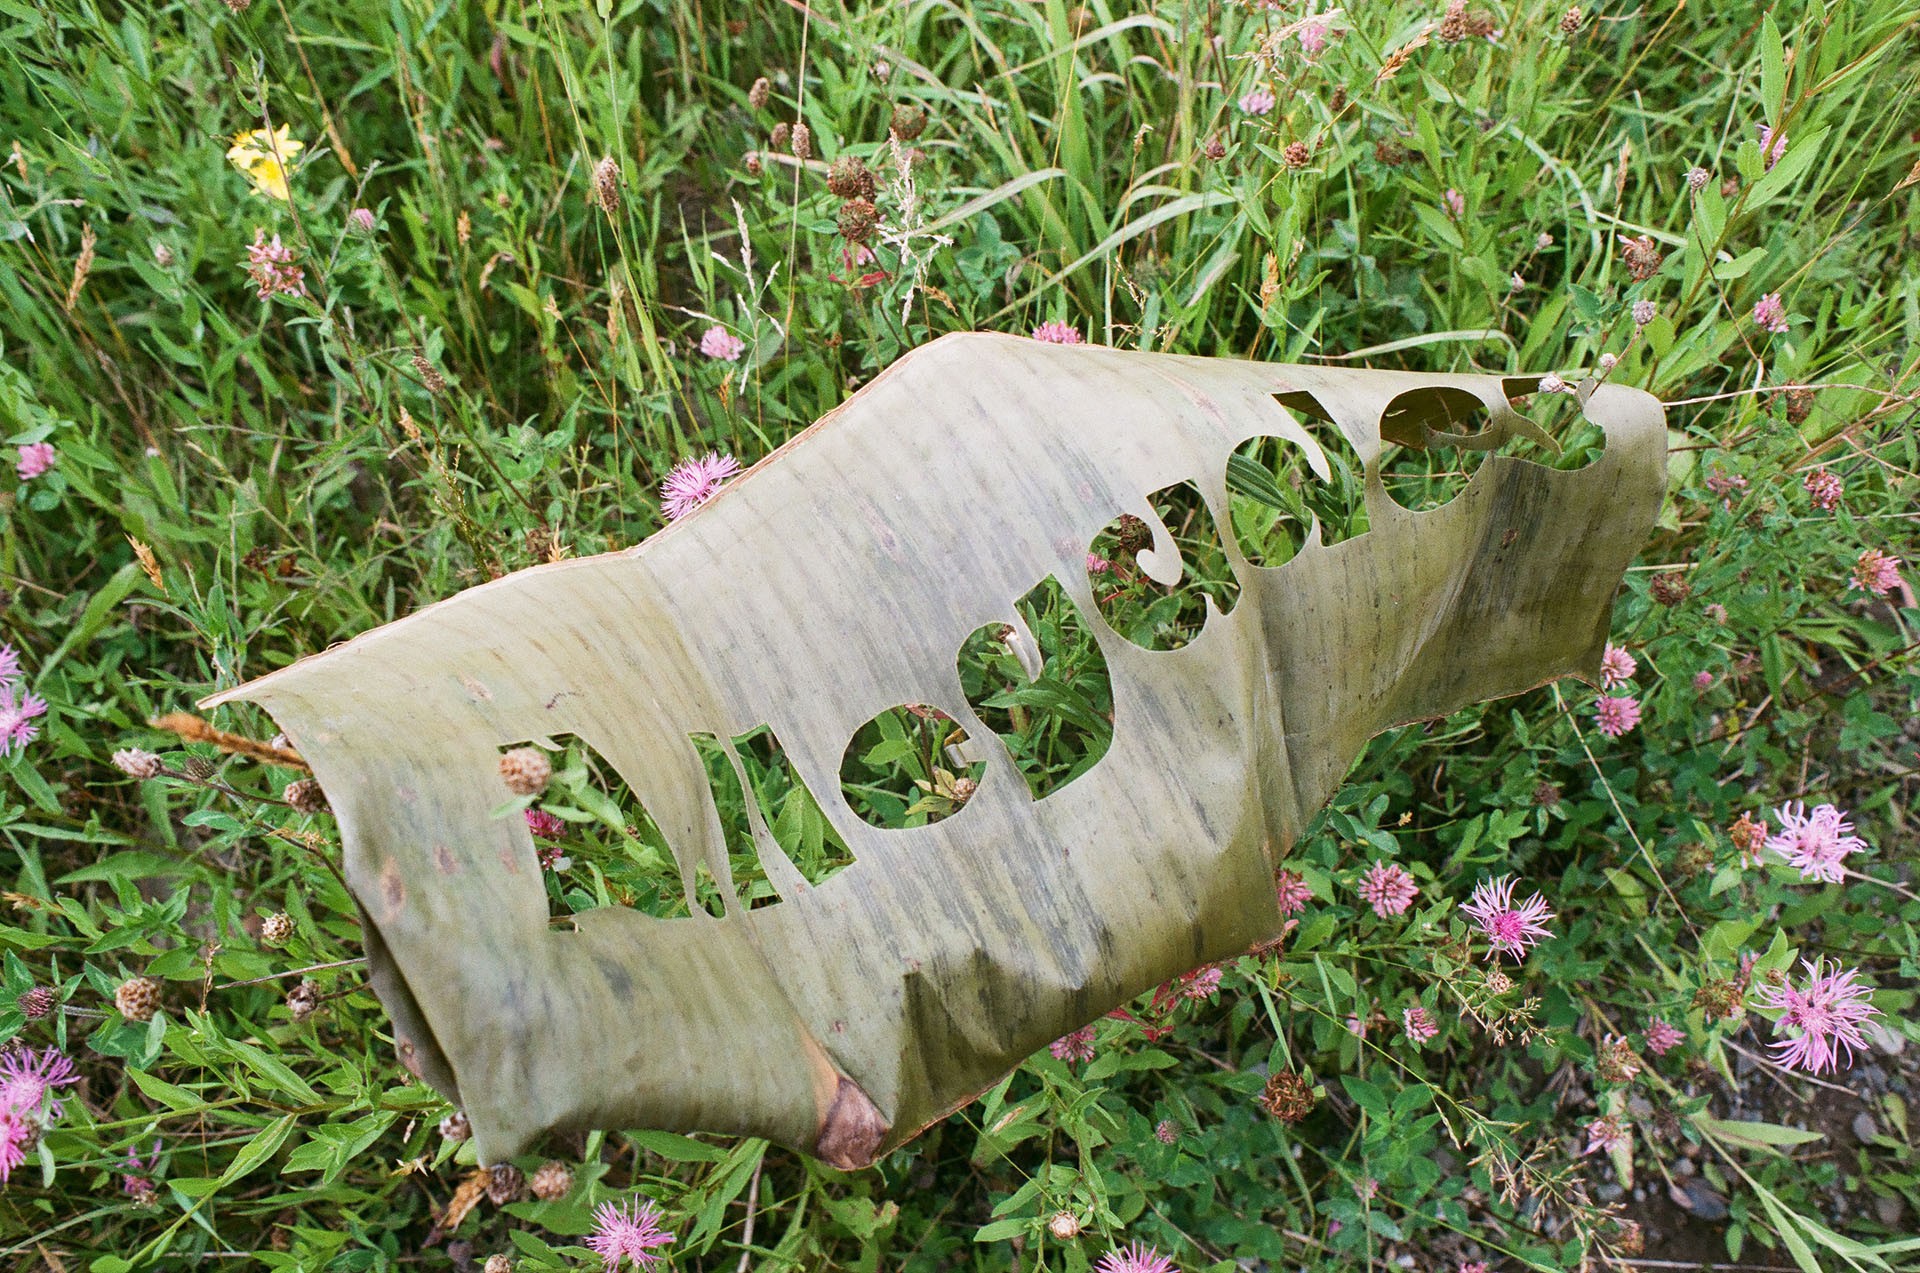 Laser cut plantain leaf with exhibition title A.Ilegades resting on a field of wild pink flowers